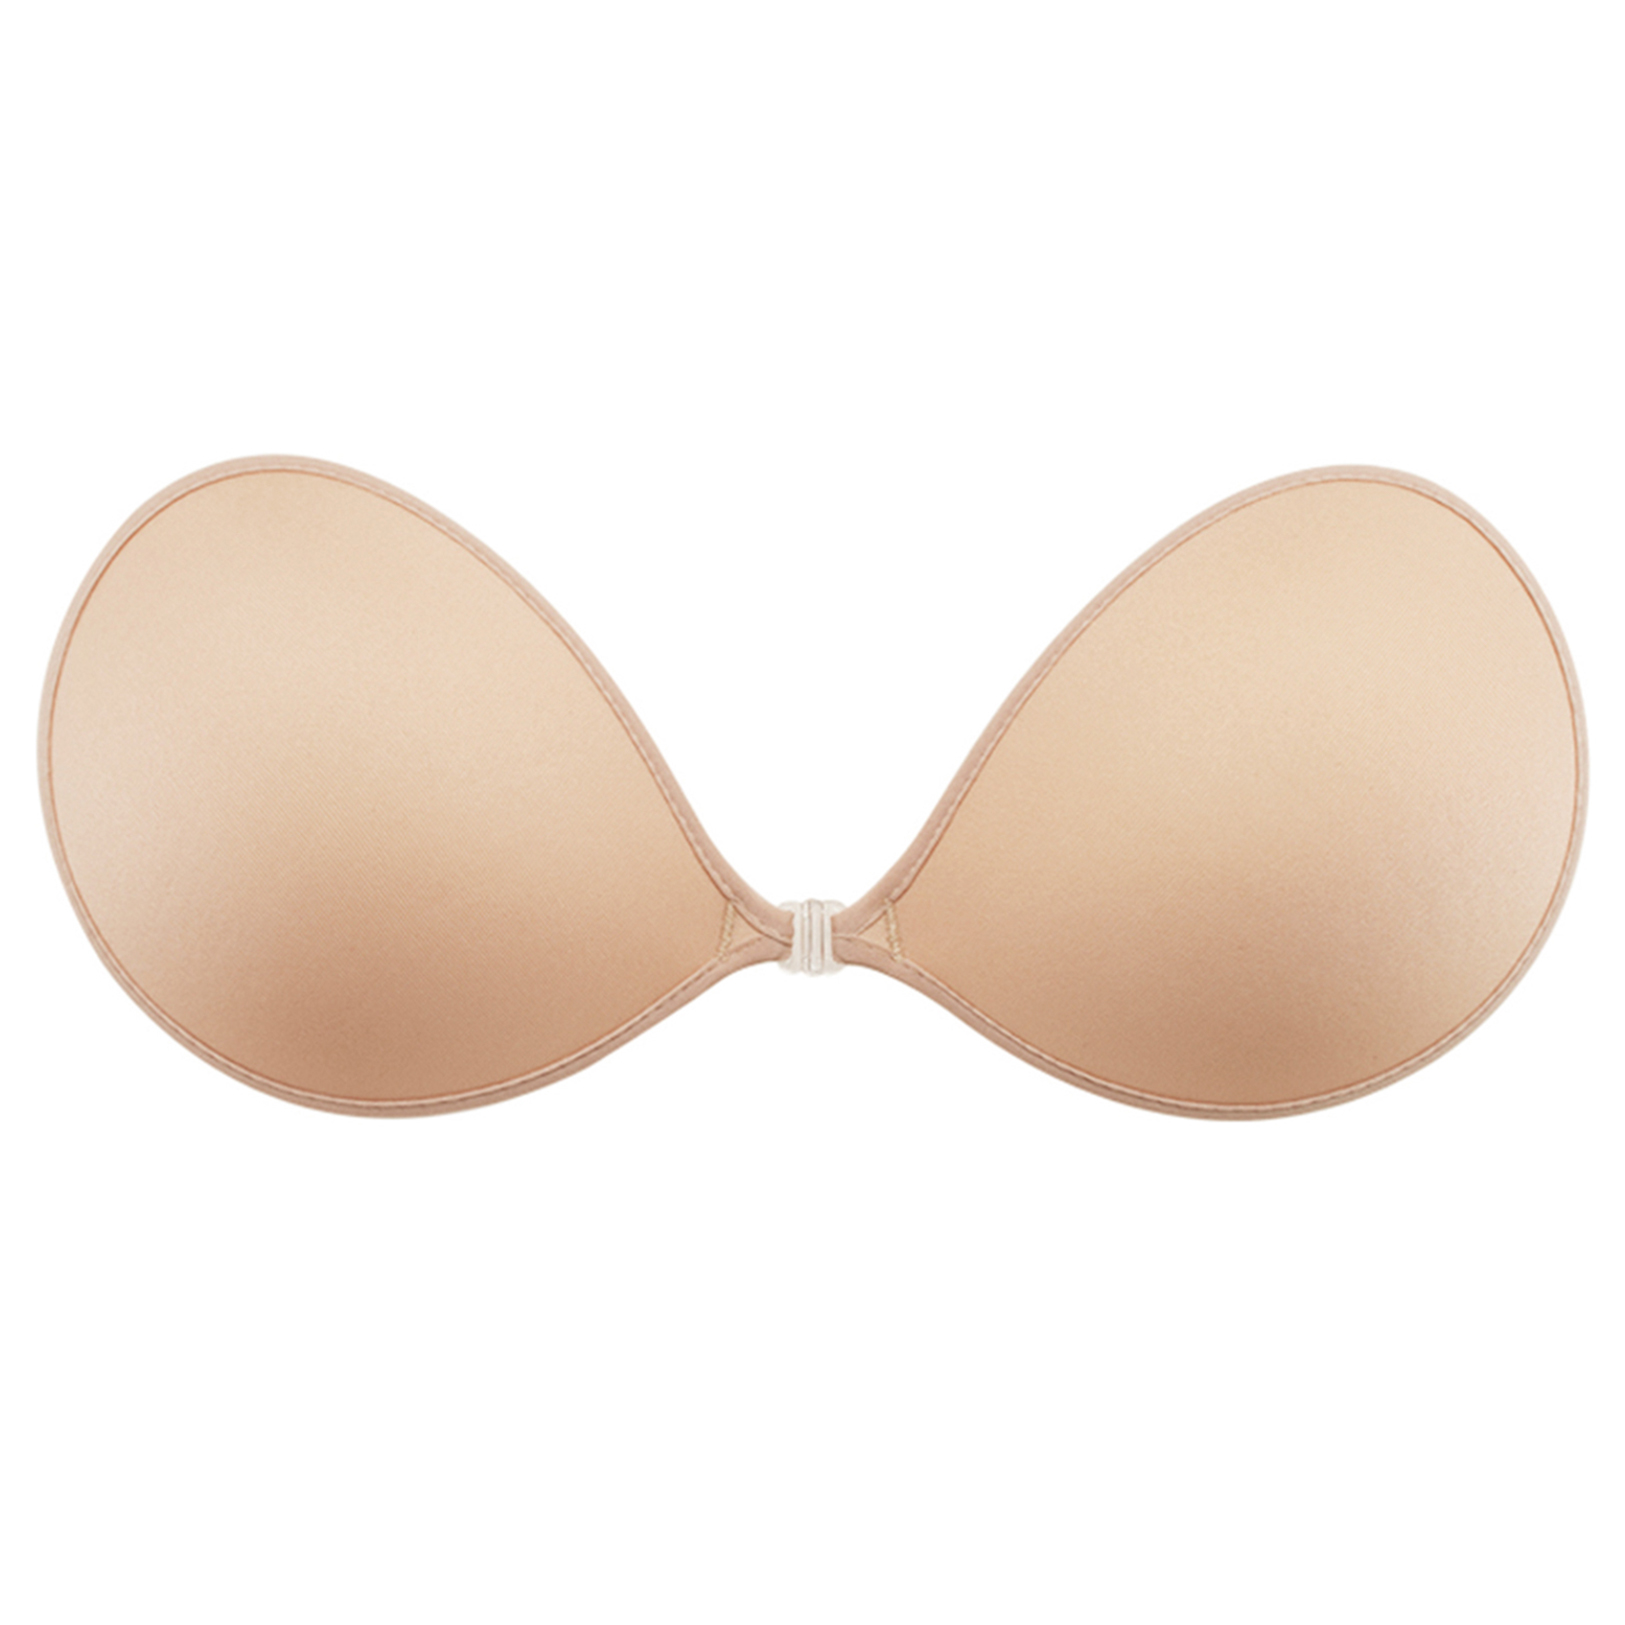 Adhesive Backless Adhesive Sticky Strapless Silicone Nude Bra Push